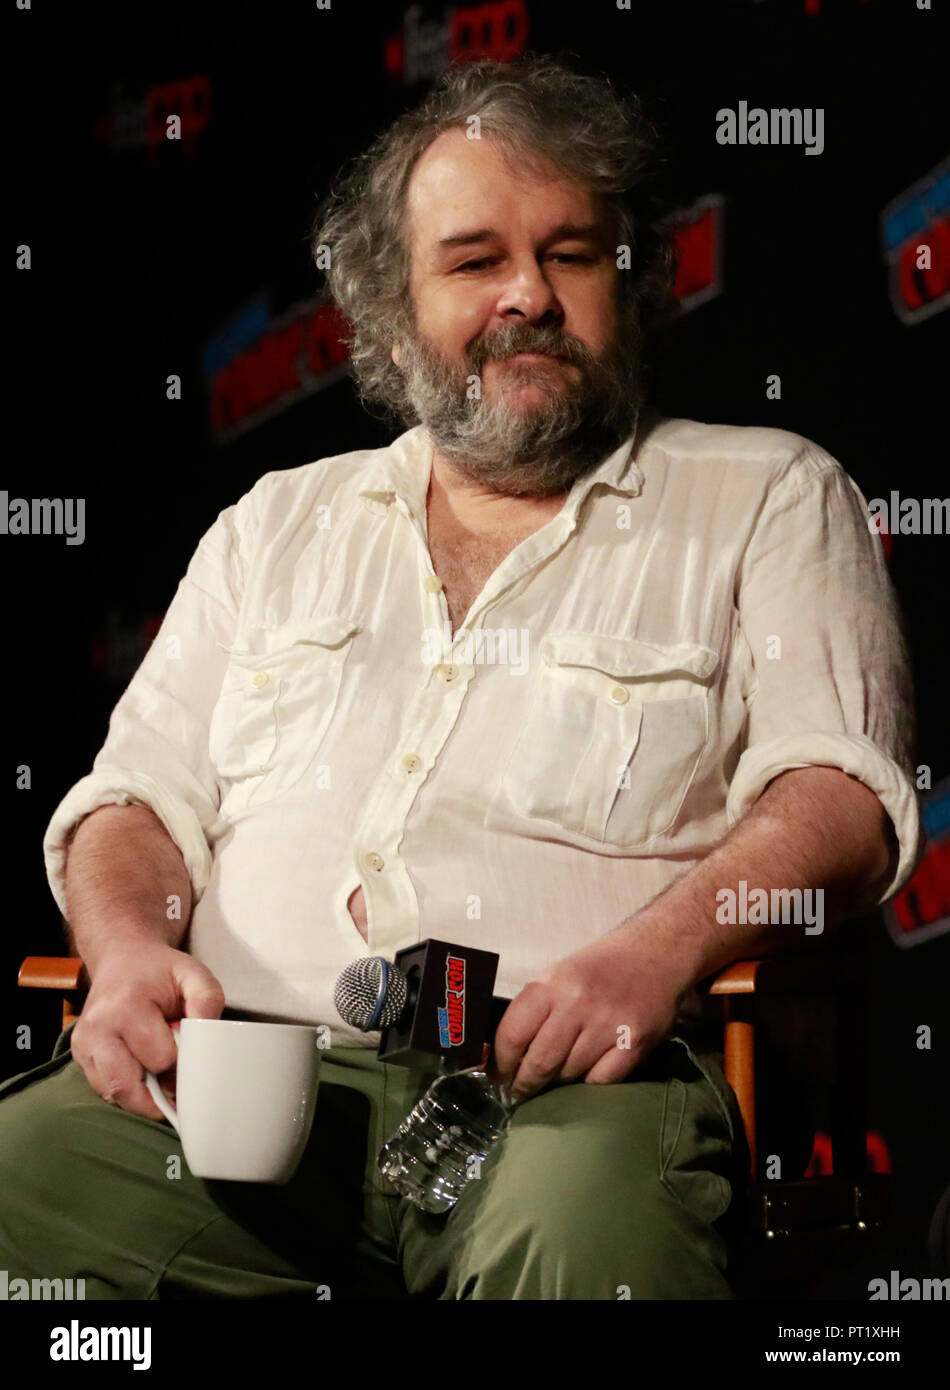 New York, NY, USA. 5th Oct, 2018. Peter Jackson at the Mortal Engines Panel during the 2018 New York Comic Con at The Jacob K. Javits Convention Center in New York City on October 5, 2018. Credit: Diego Corredor/Media Punch/Alamy Live News Stock Photo